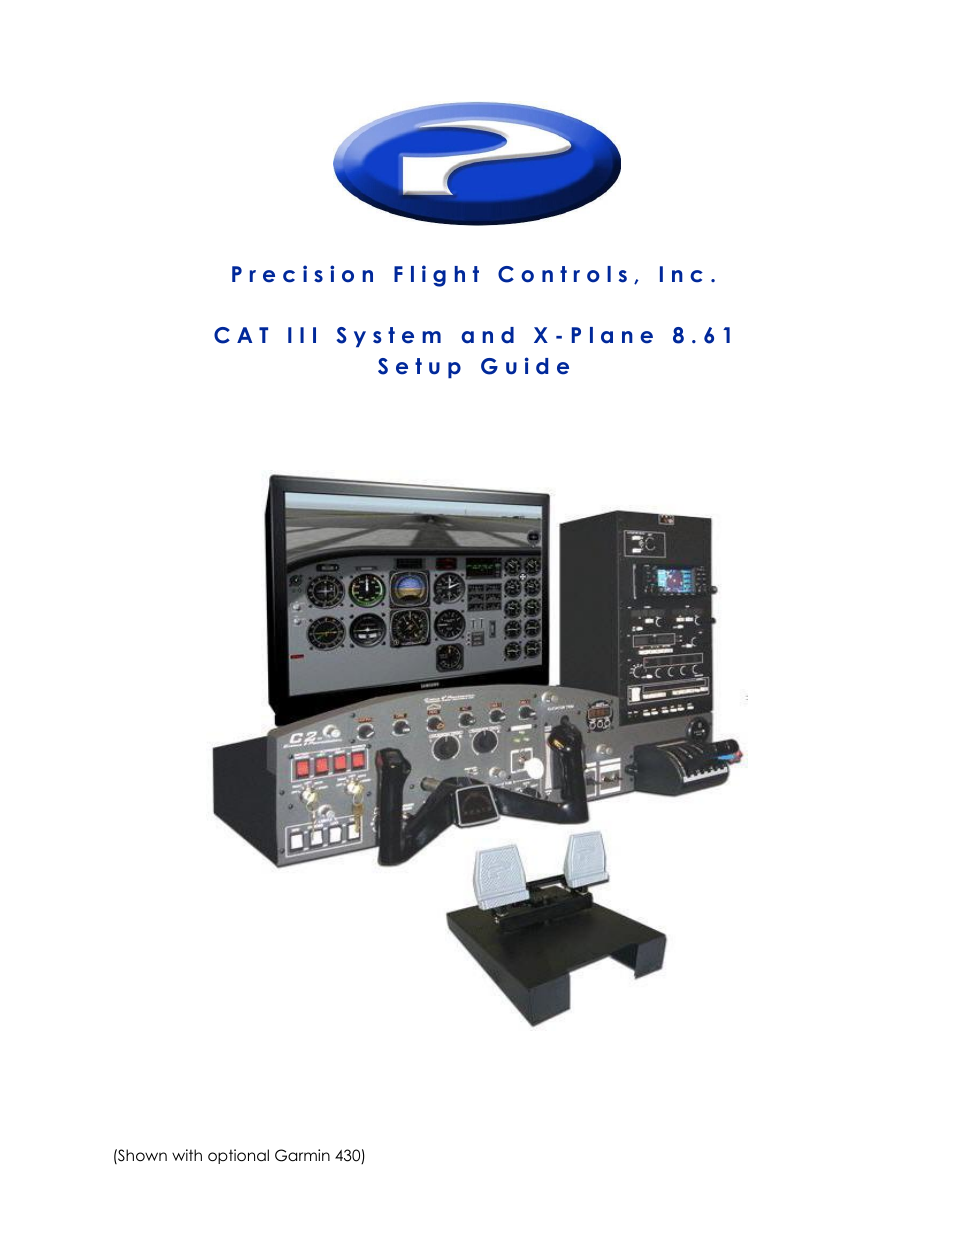 Serial CAT III and and X-Plane 8.61